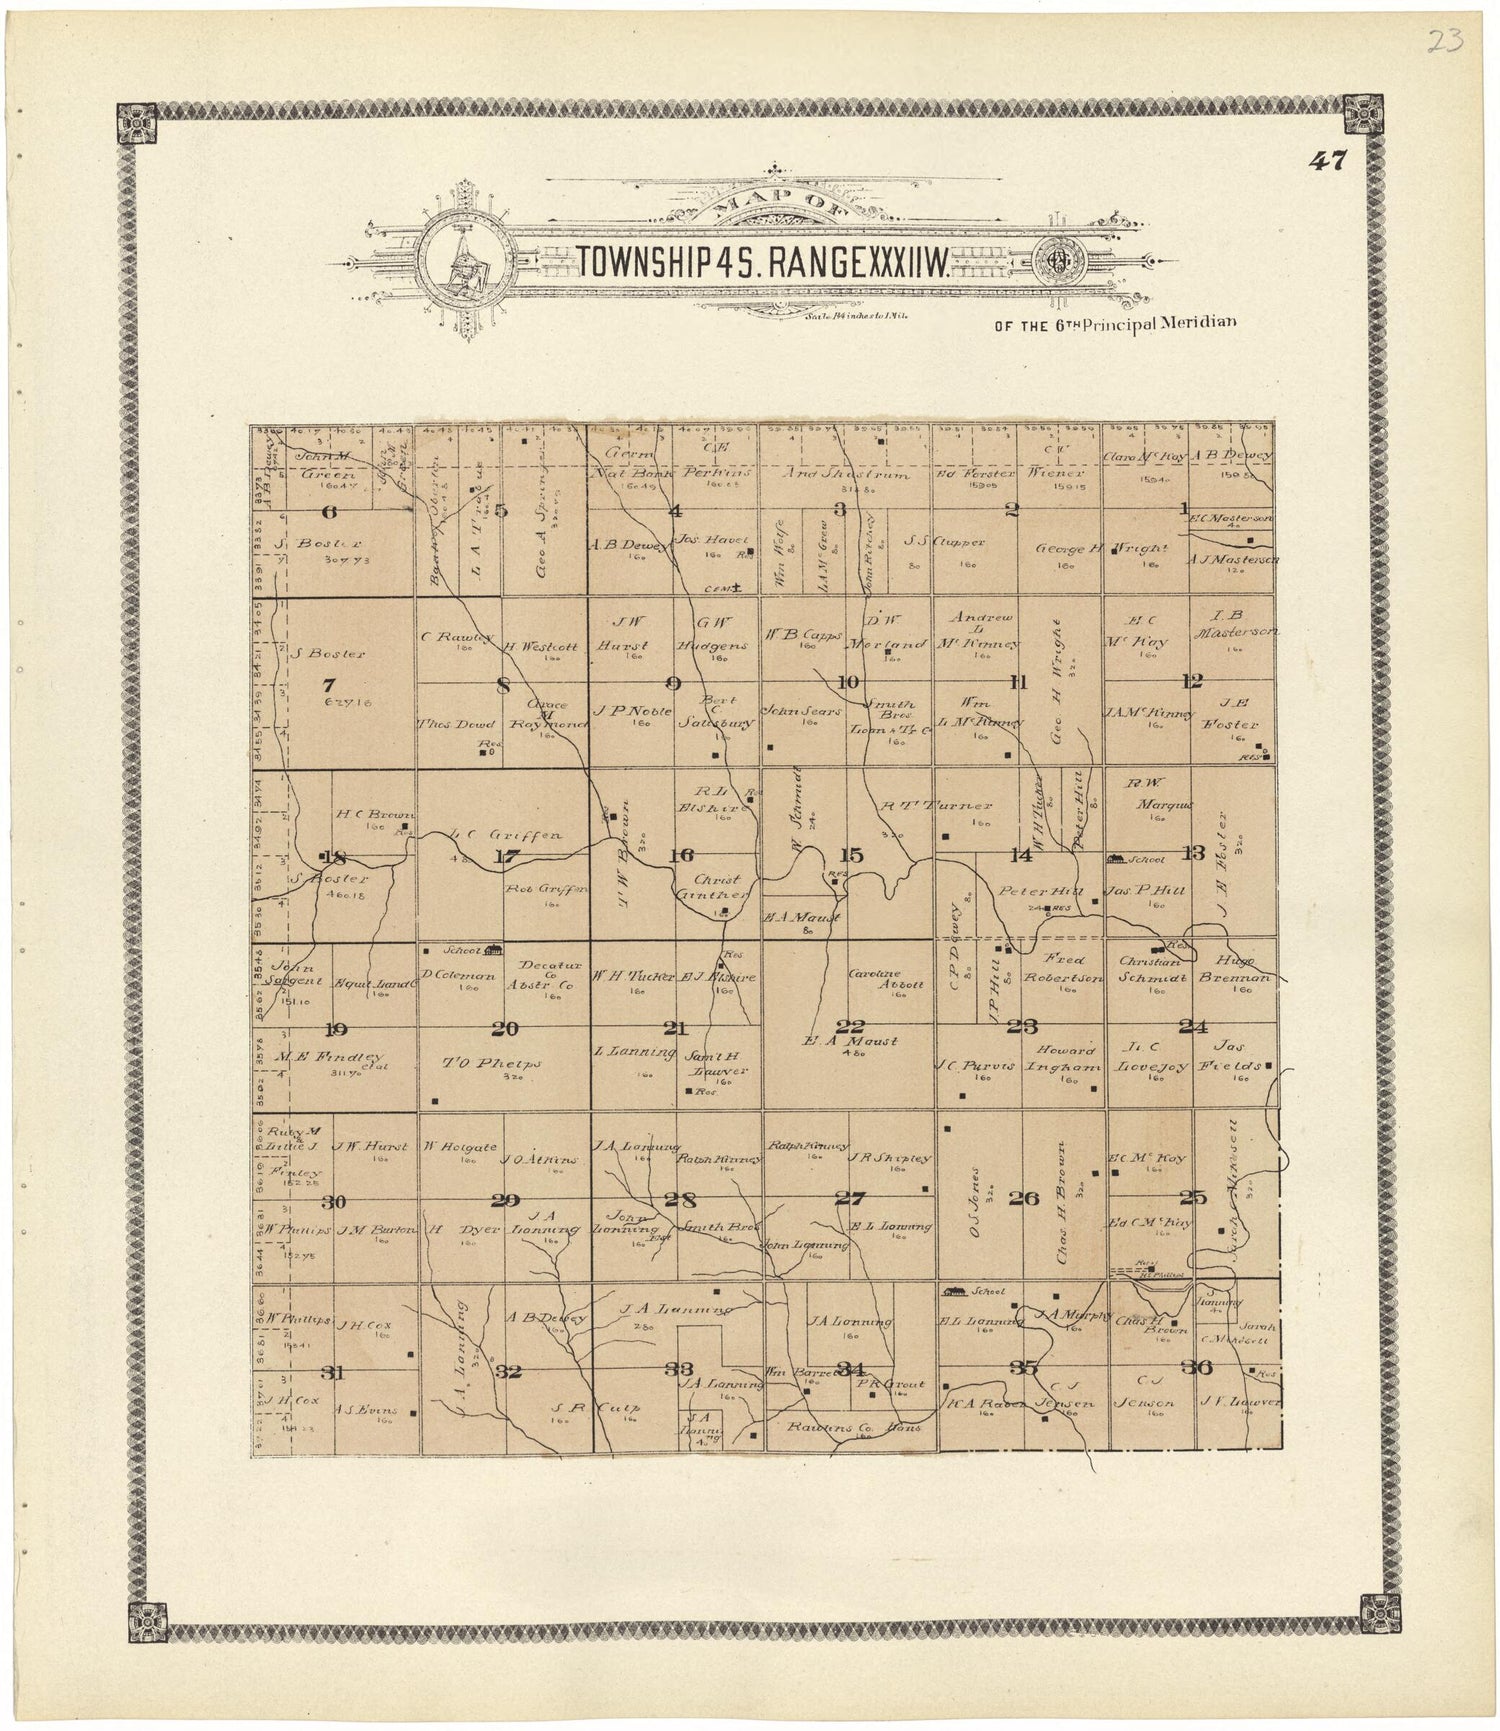 This old map of Map of Township 4 S. Range XXXII W. from Standard Atlas of Rawlins County, Kansas from 1906 was created by  Geo. A. Ogle &amp; Co in 1906